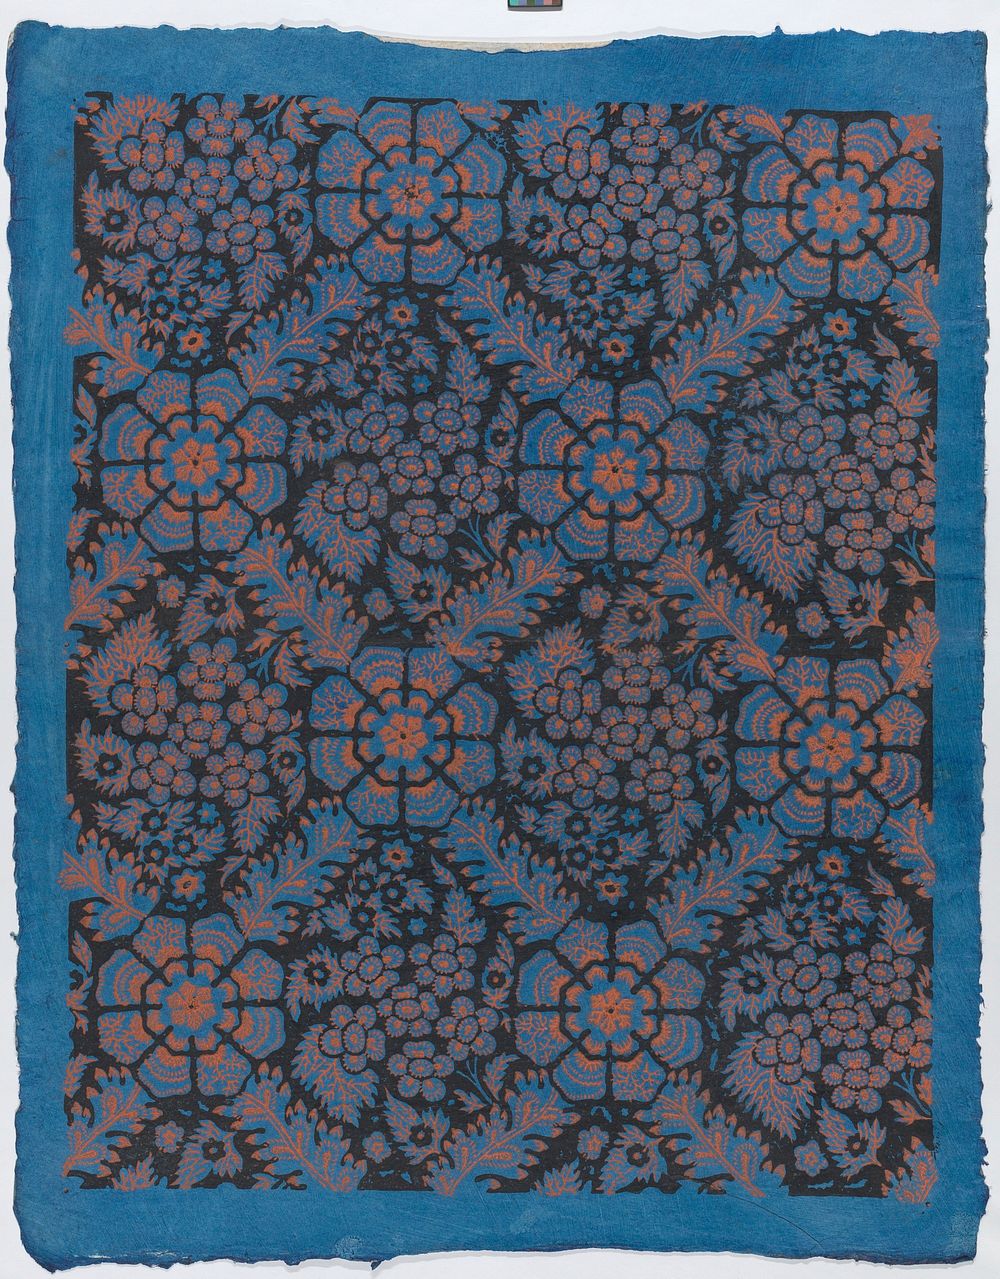 Sheet with overall floral pattern on blue background